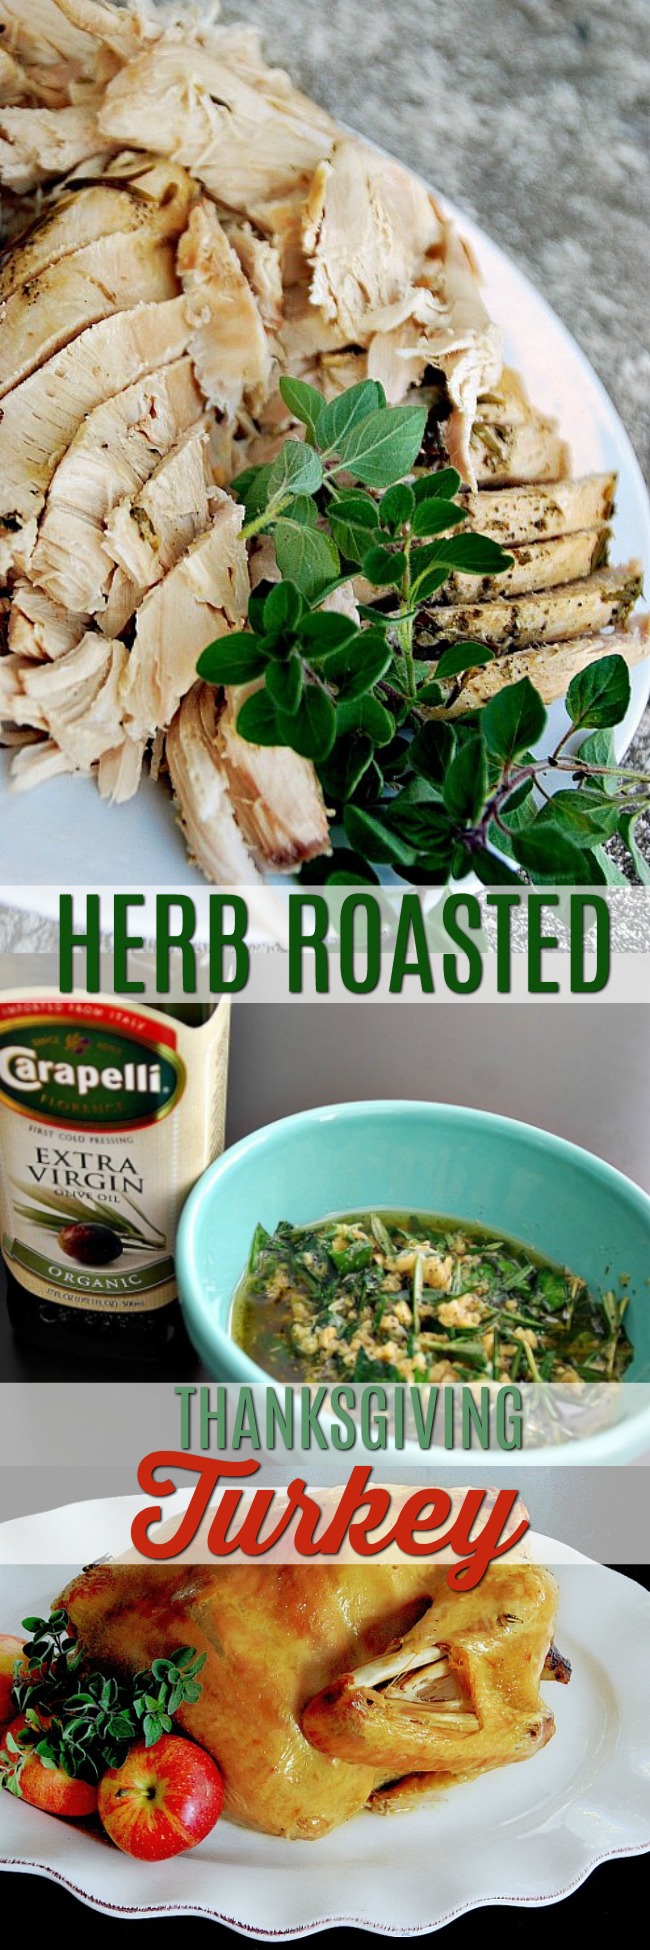 The easiest most flavorful herb-roasted thanksgiving turkey recipe